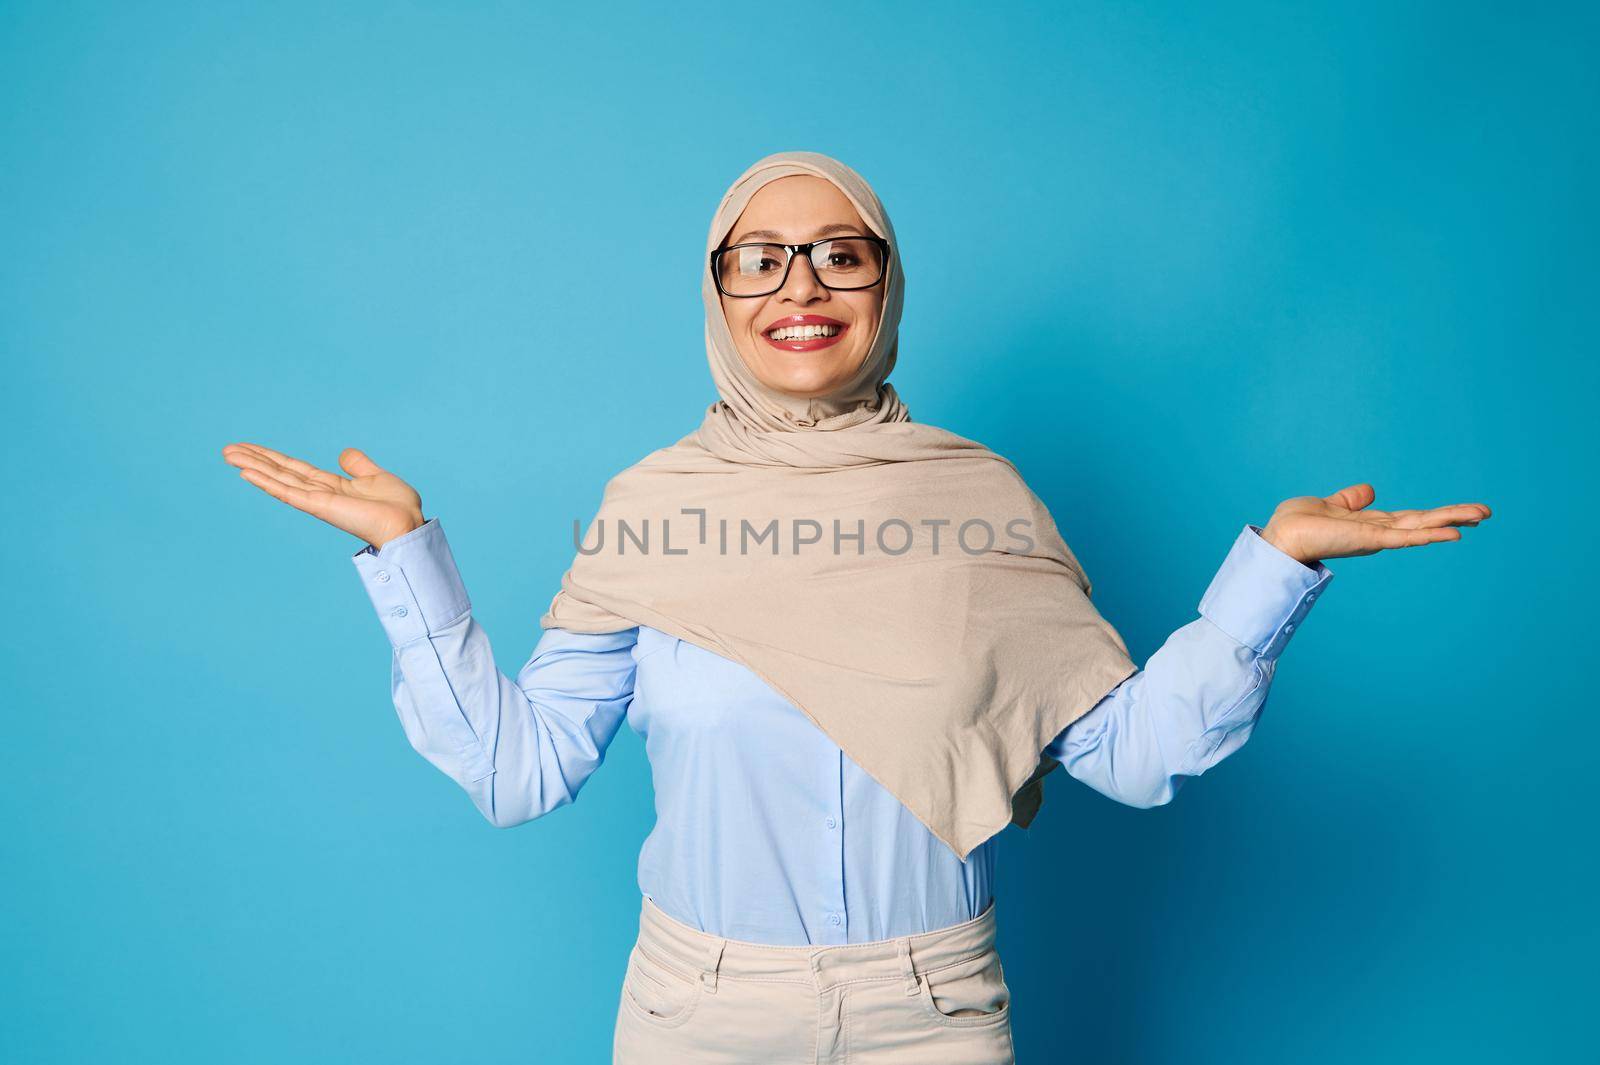 Smiling woman with covered head in hijab posing with outstretched arms and palms up, presenting on blue background with copy space by artgf